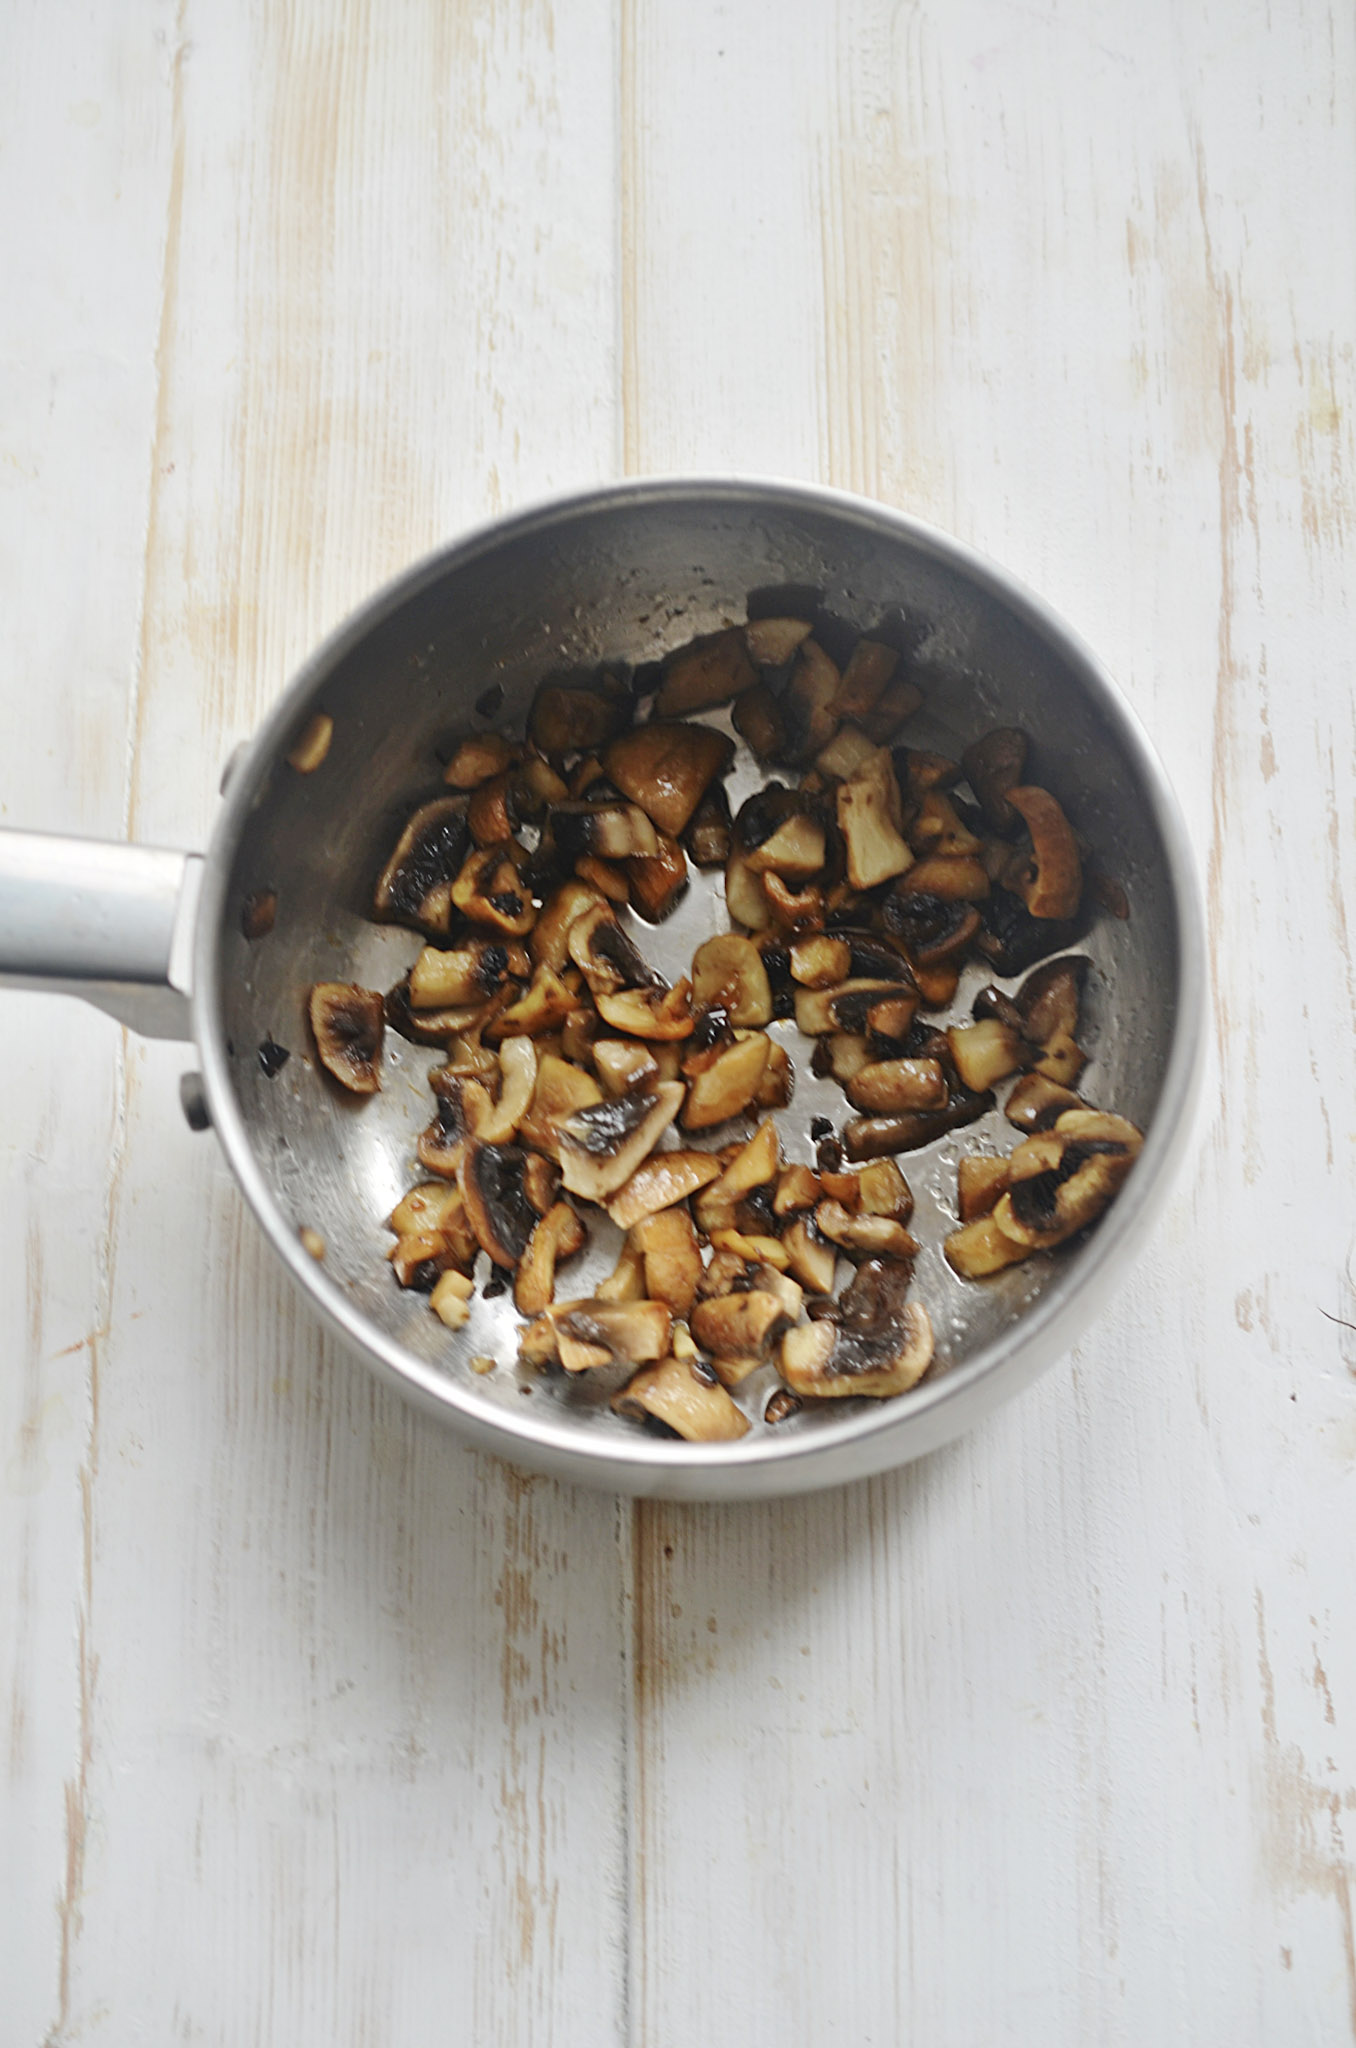 A pan with sautéed mushrooms. They are cremini mushrooms cooked to perfection. These mushrooms will be added to the Fully Loaded Burger Bowls.